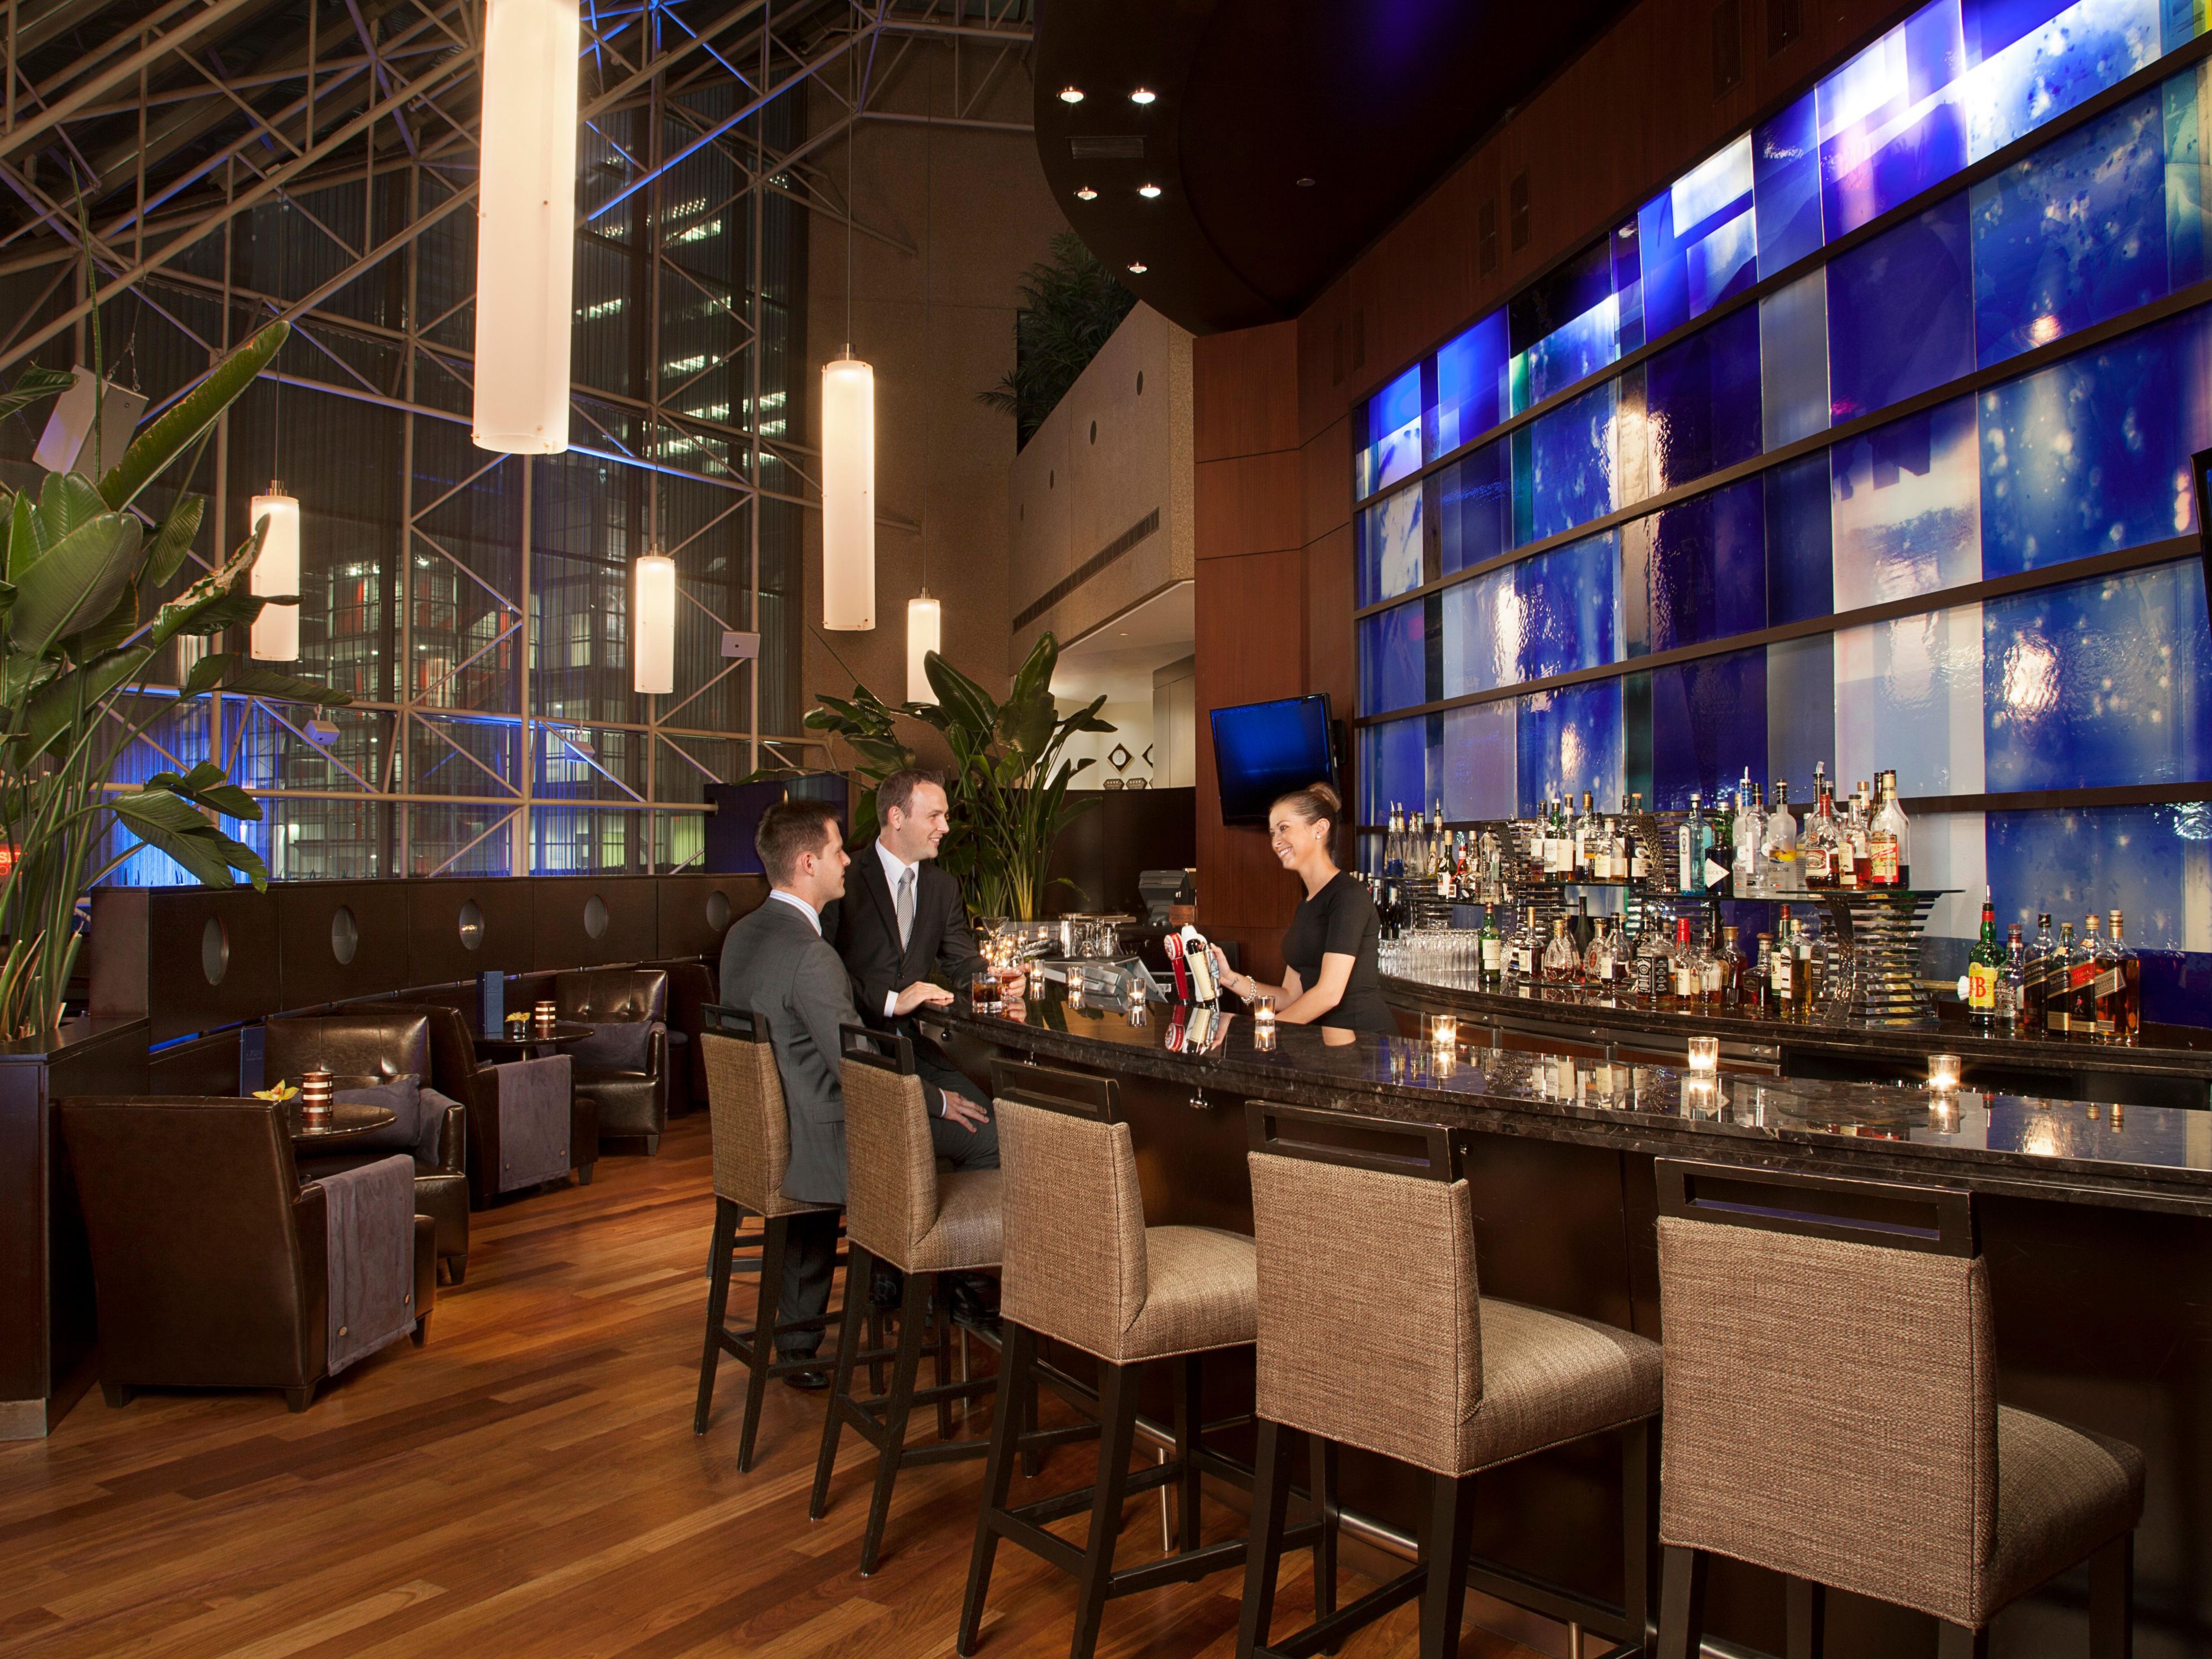 The Azure Bar offers a contemporary space to meet friends